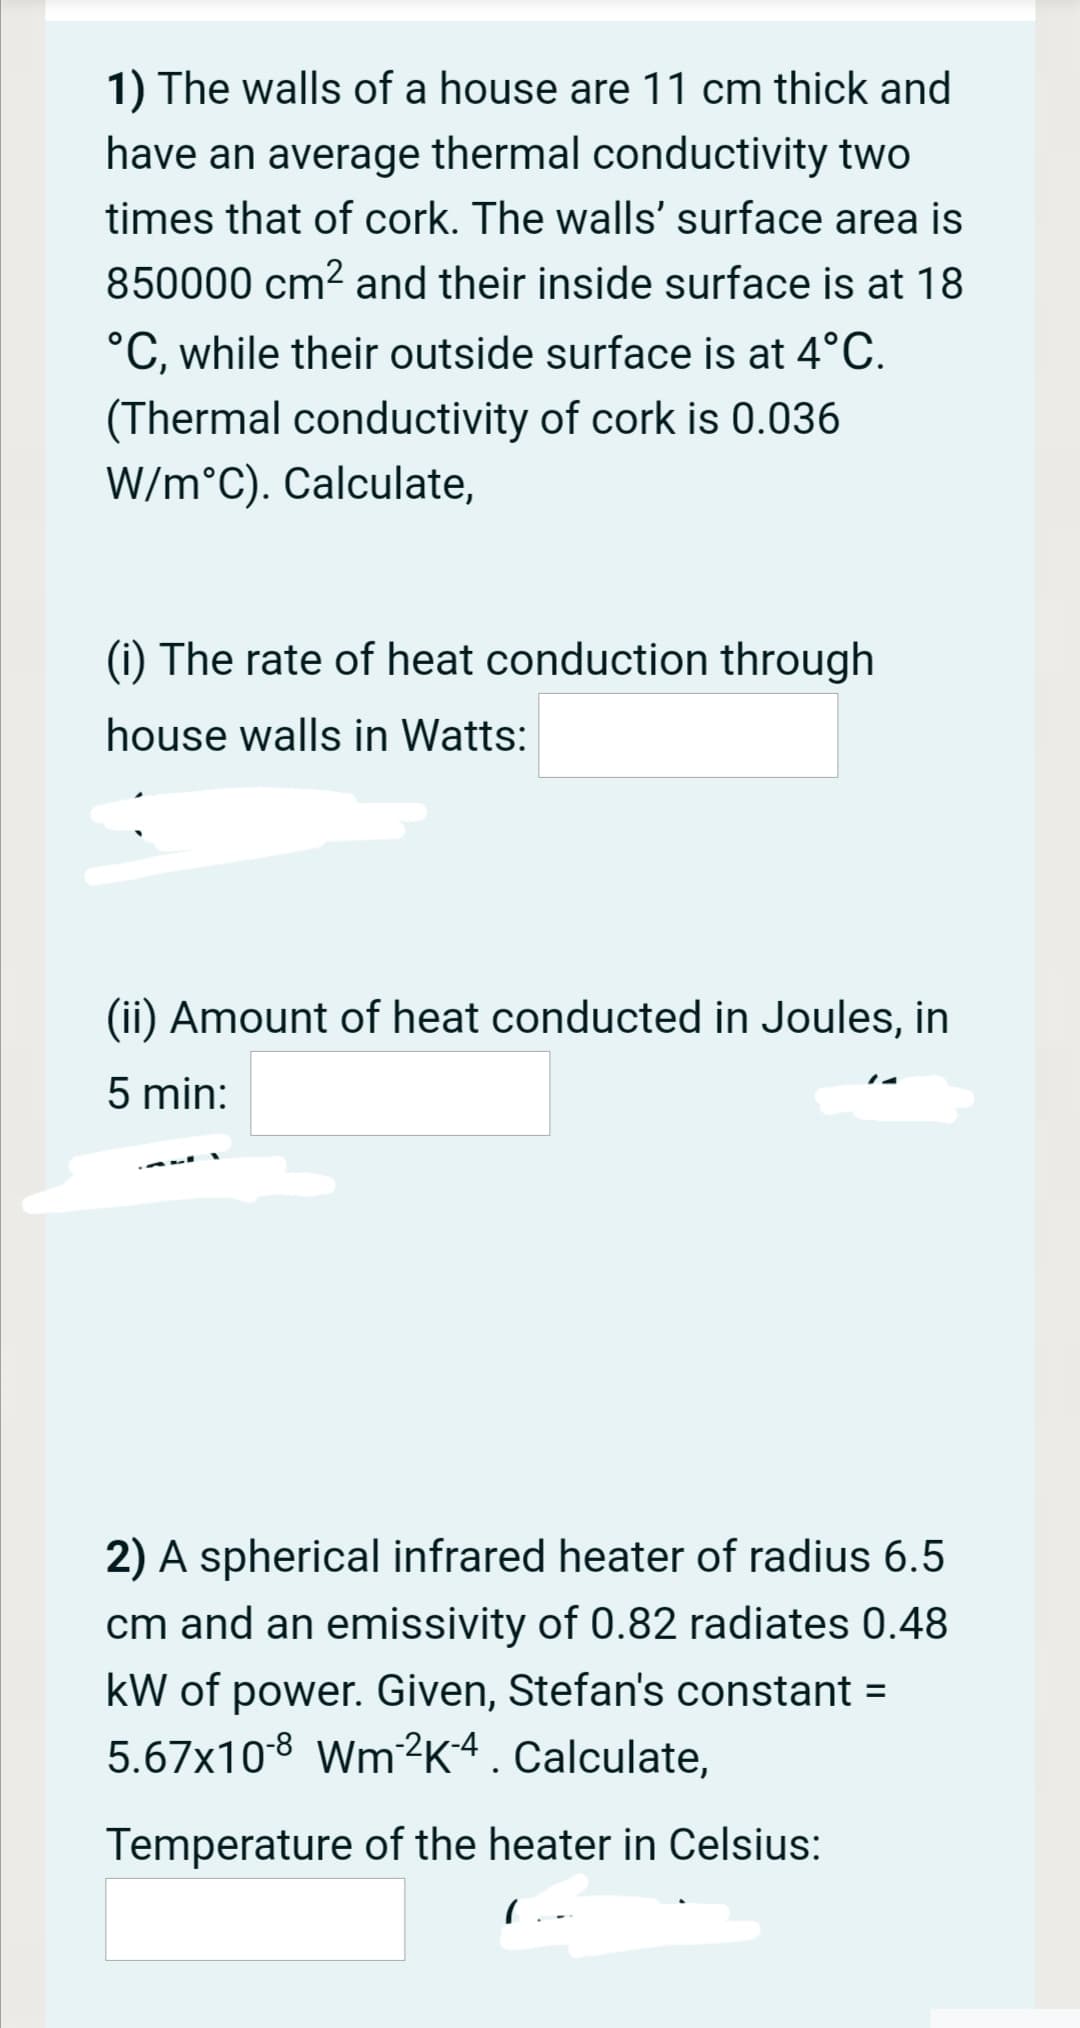 1) The walls of a house are 11 cm thick and
have an average thermal conductivity two
times that of cork. The walls' surface area is
850000 cm2 and their inside surface is at 18
°C, while their outside surface is at 4°C.
(Thermal conductivity of cork is 0.036
W/m°C). Calculate,
(i) The rate of heat conduction through
house walls in Watts:
(ii) Amount of heat conducted in Joules, in
5 min:
2) A spherical infrared heater of radius 6.5
cm and an emissivity of 0.82 radiates 0.48
kW of power. Given, Stefan's constant =
5.67x108 Wm2K4. Calculate,
Temperature of the heater in Celsius:
